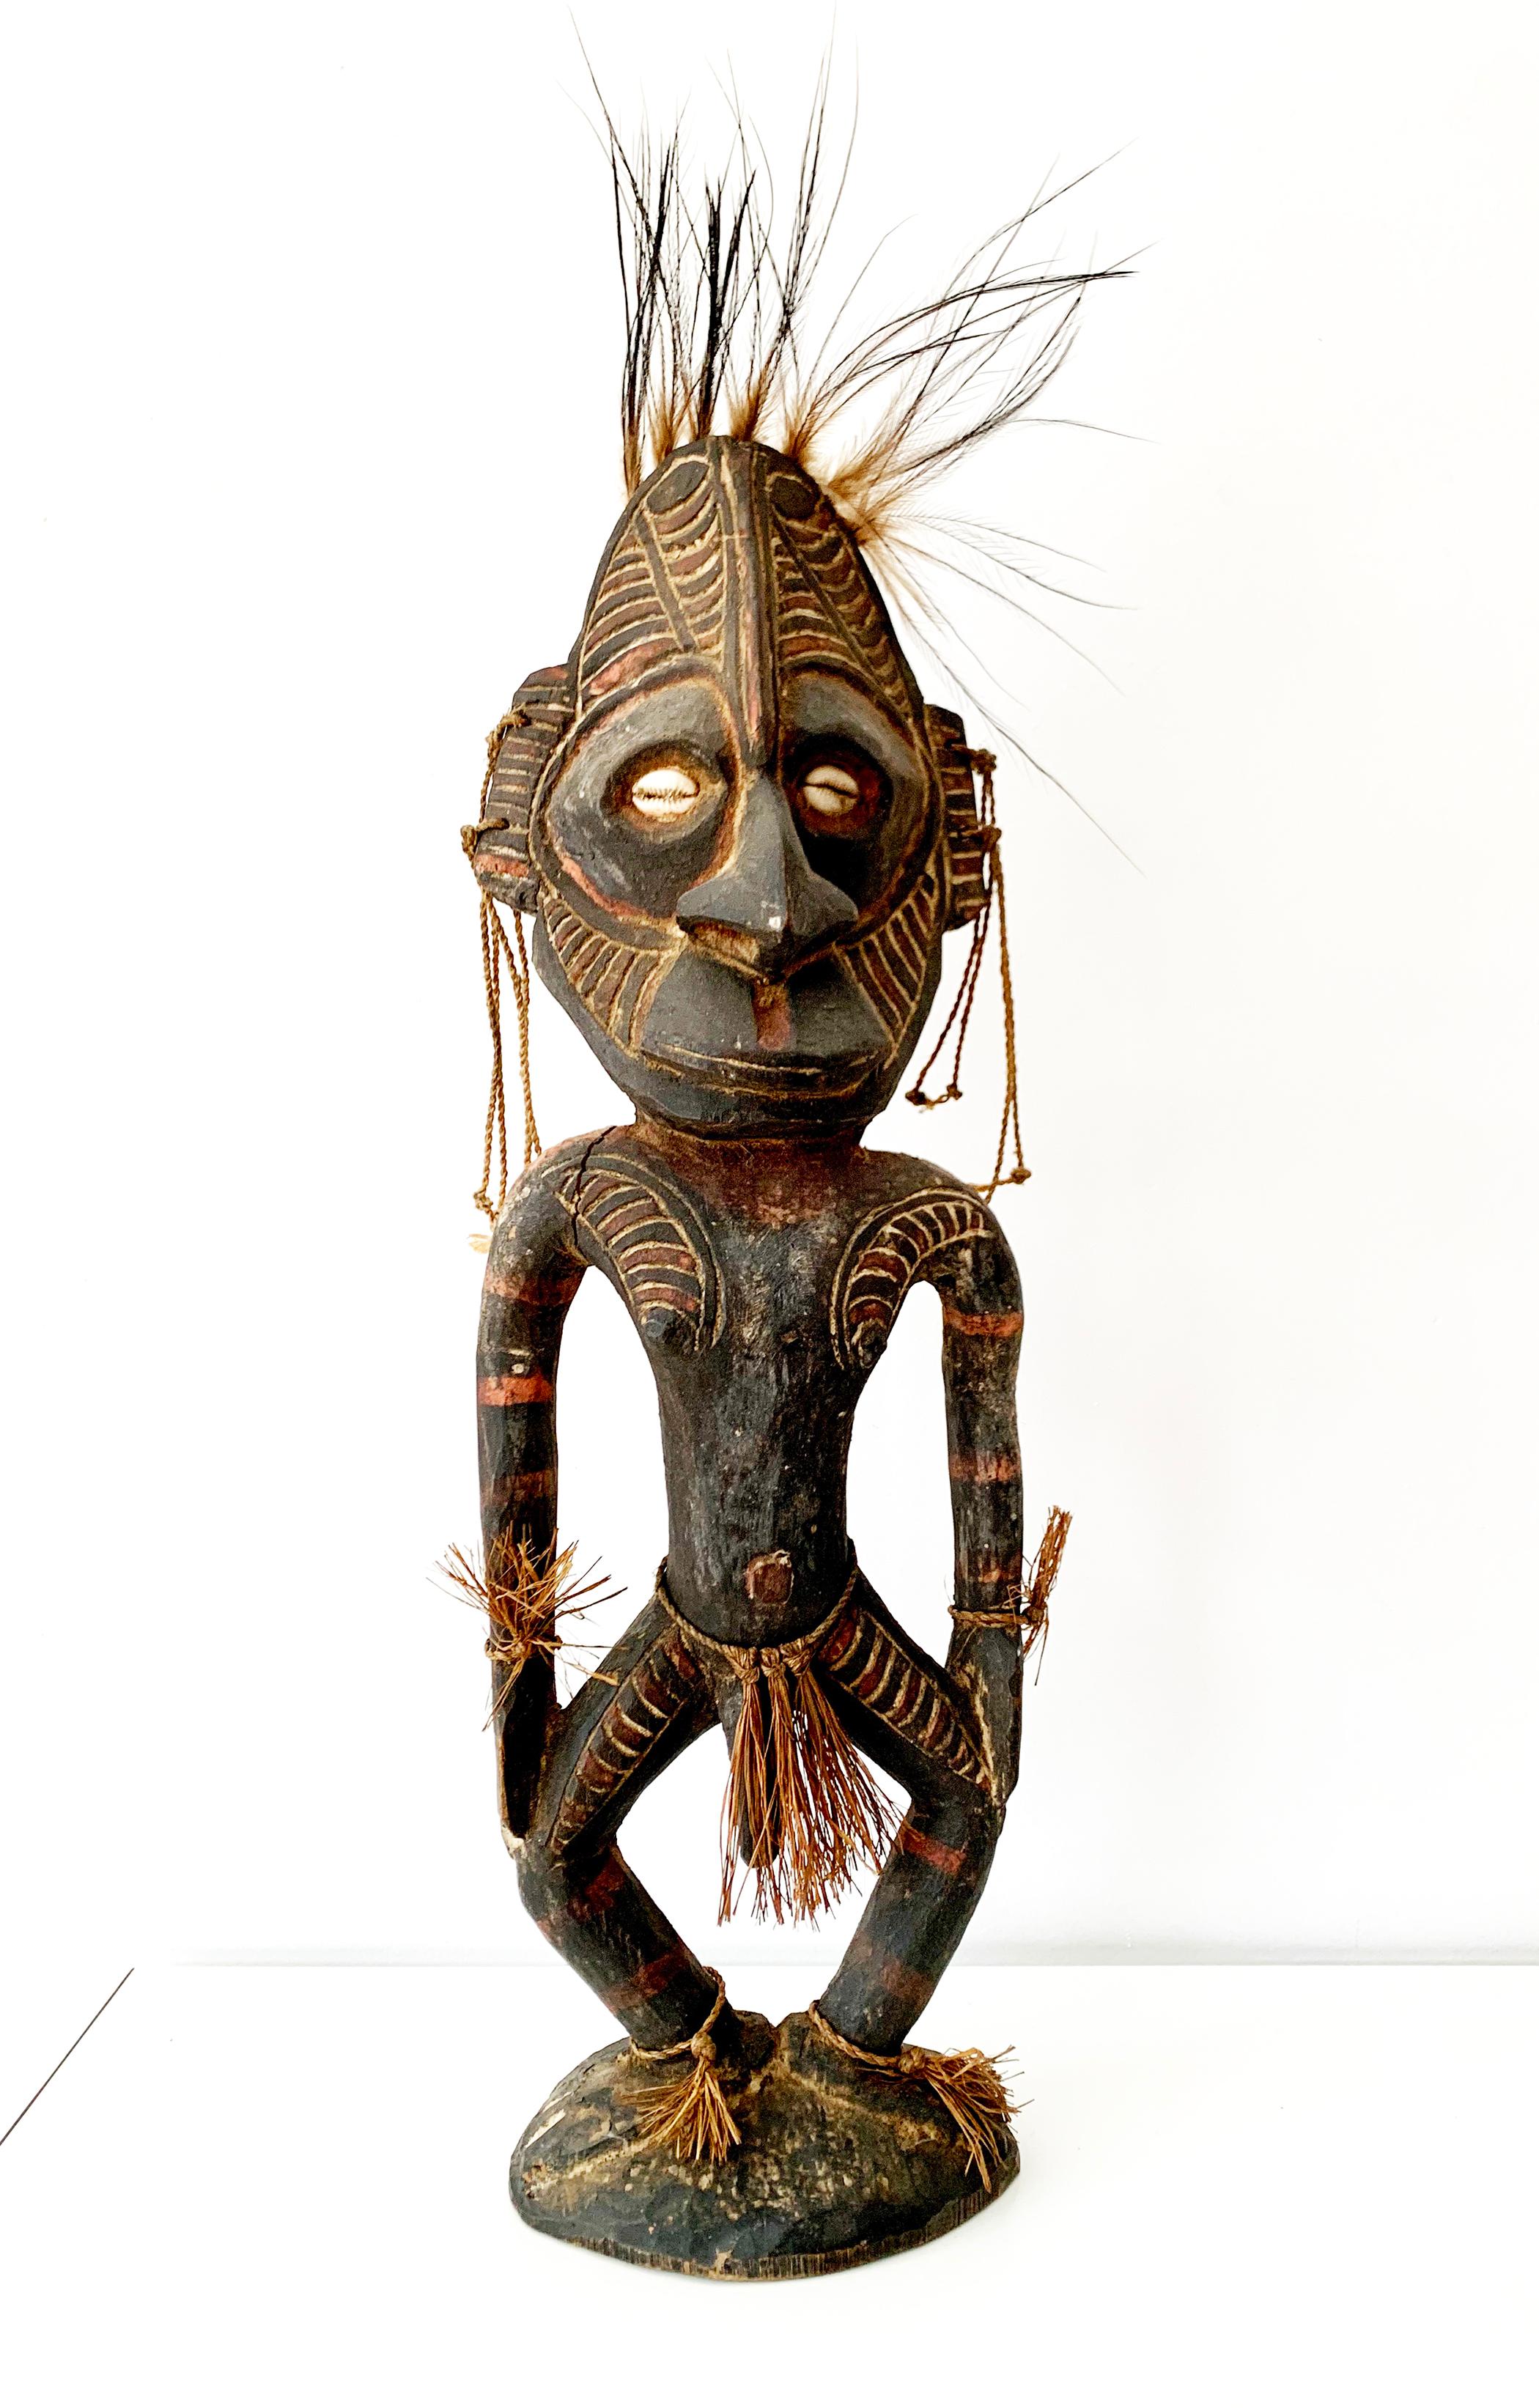 Male and Female Ancestor Spirit Figures, Sepik River, Papua New Guinea  - Sculpture by Unknown